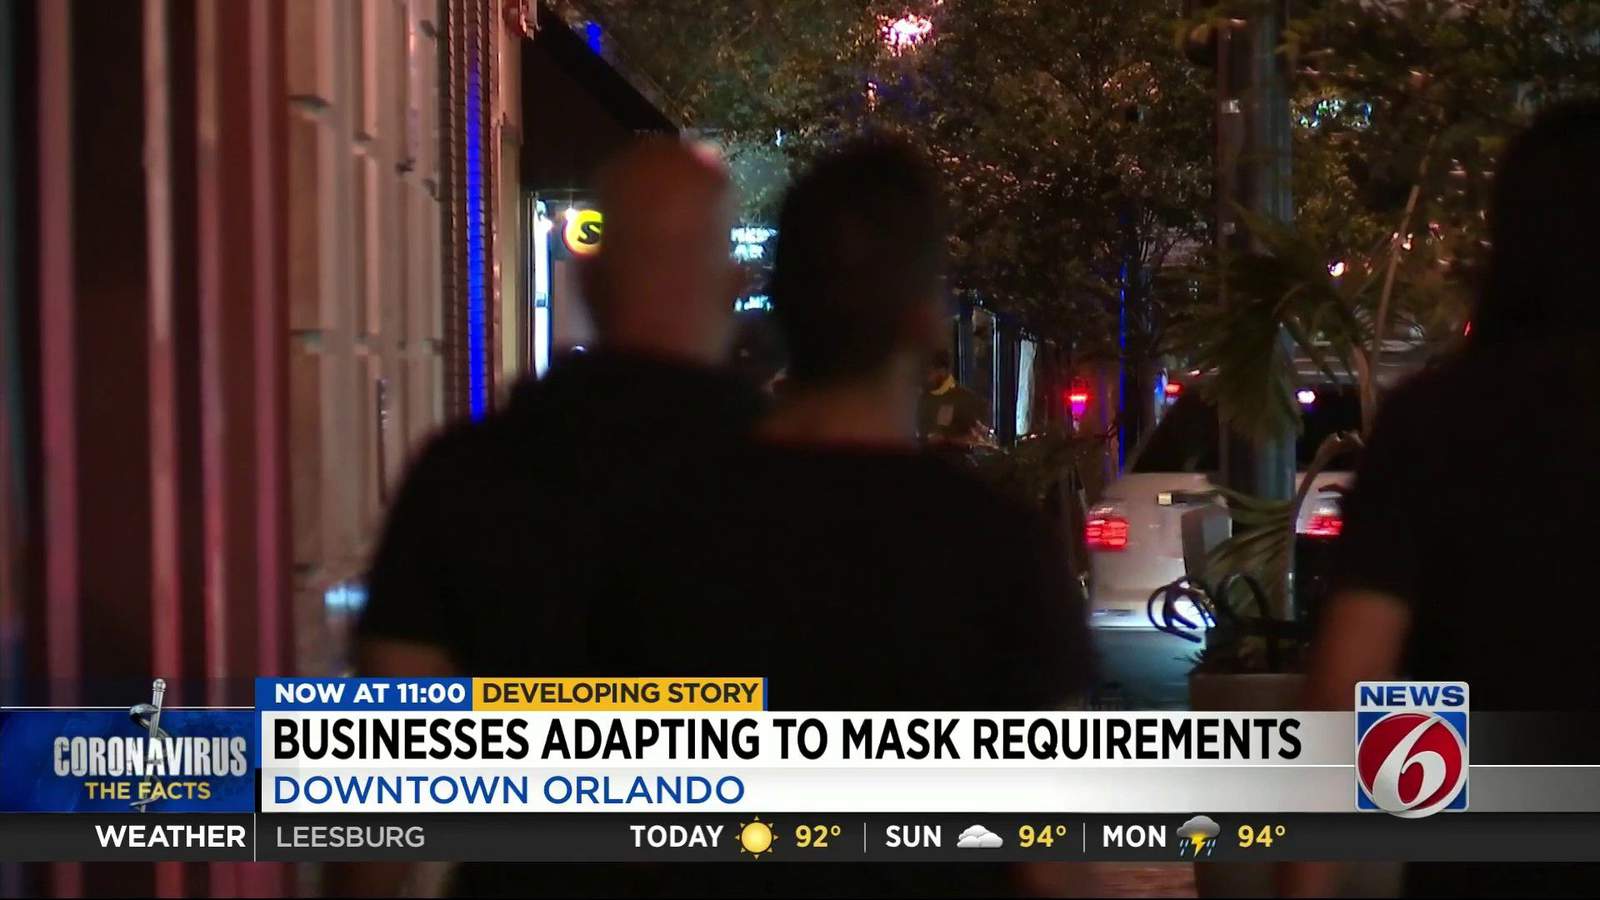 Businesses in downtown Orlando adapting to face mask requirements